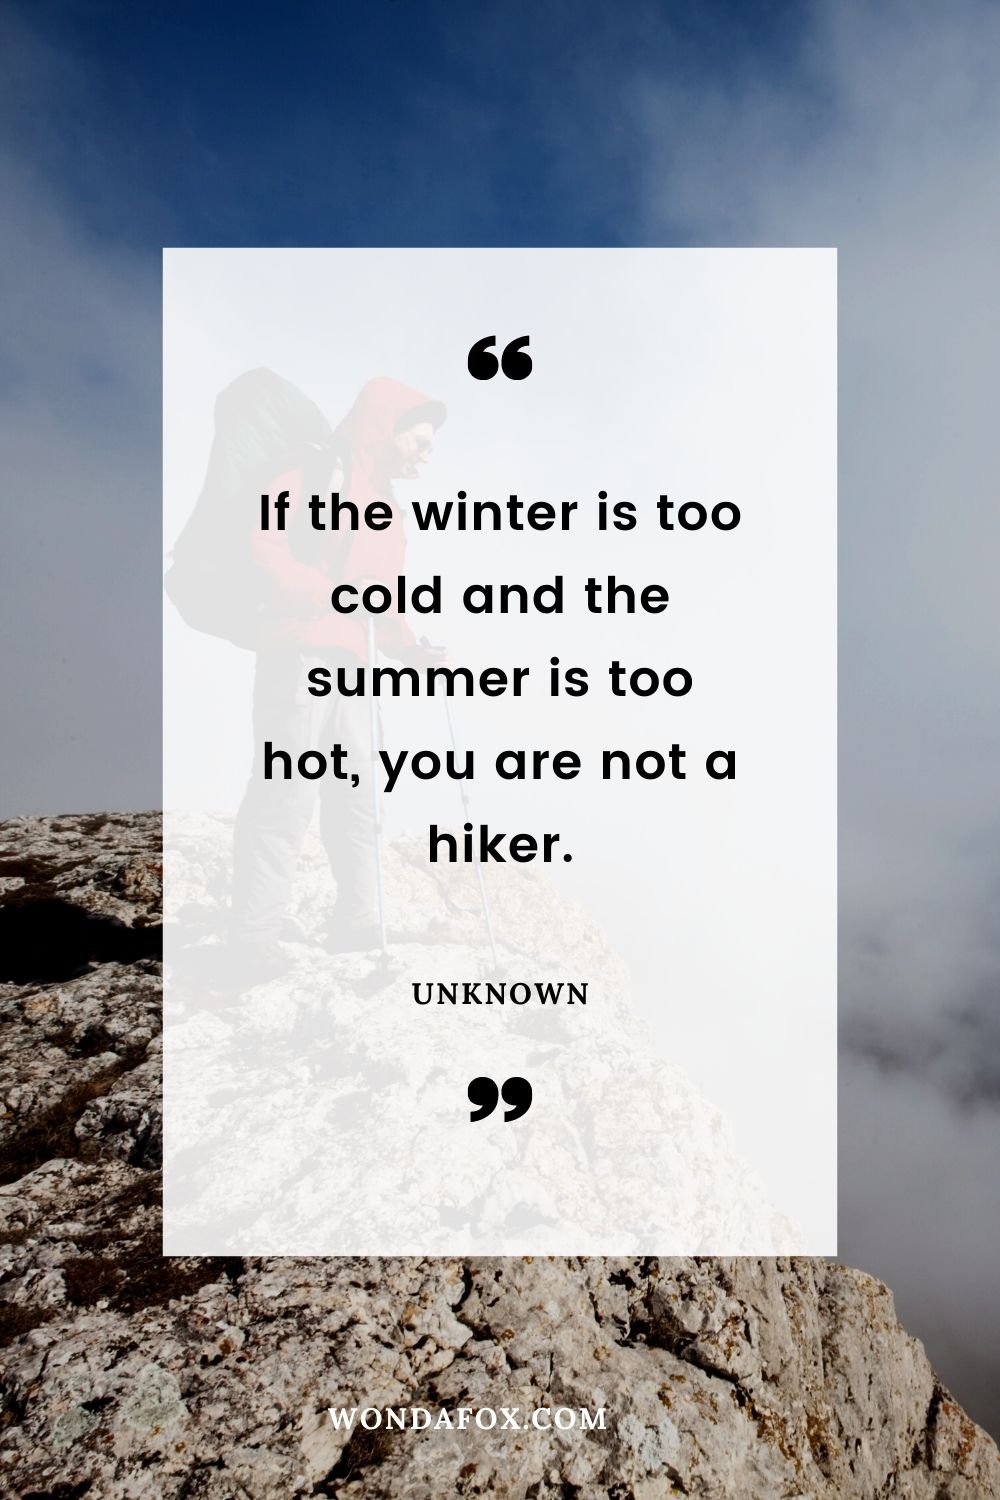 If the winter is too cold and the summer is too hot, you are not a hiker.